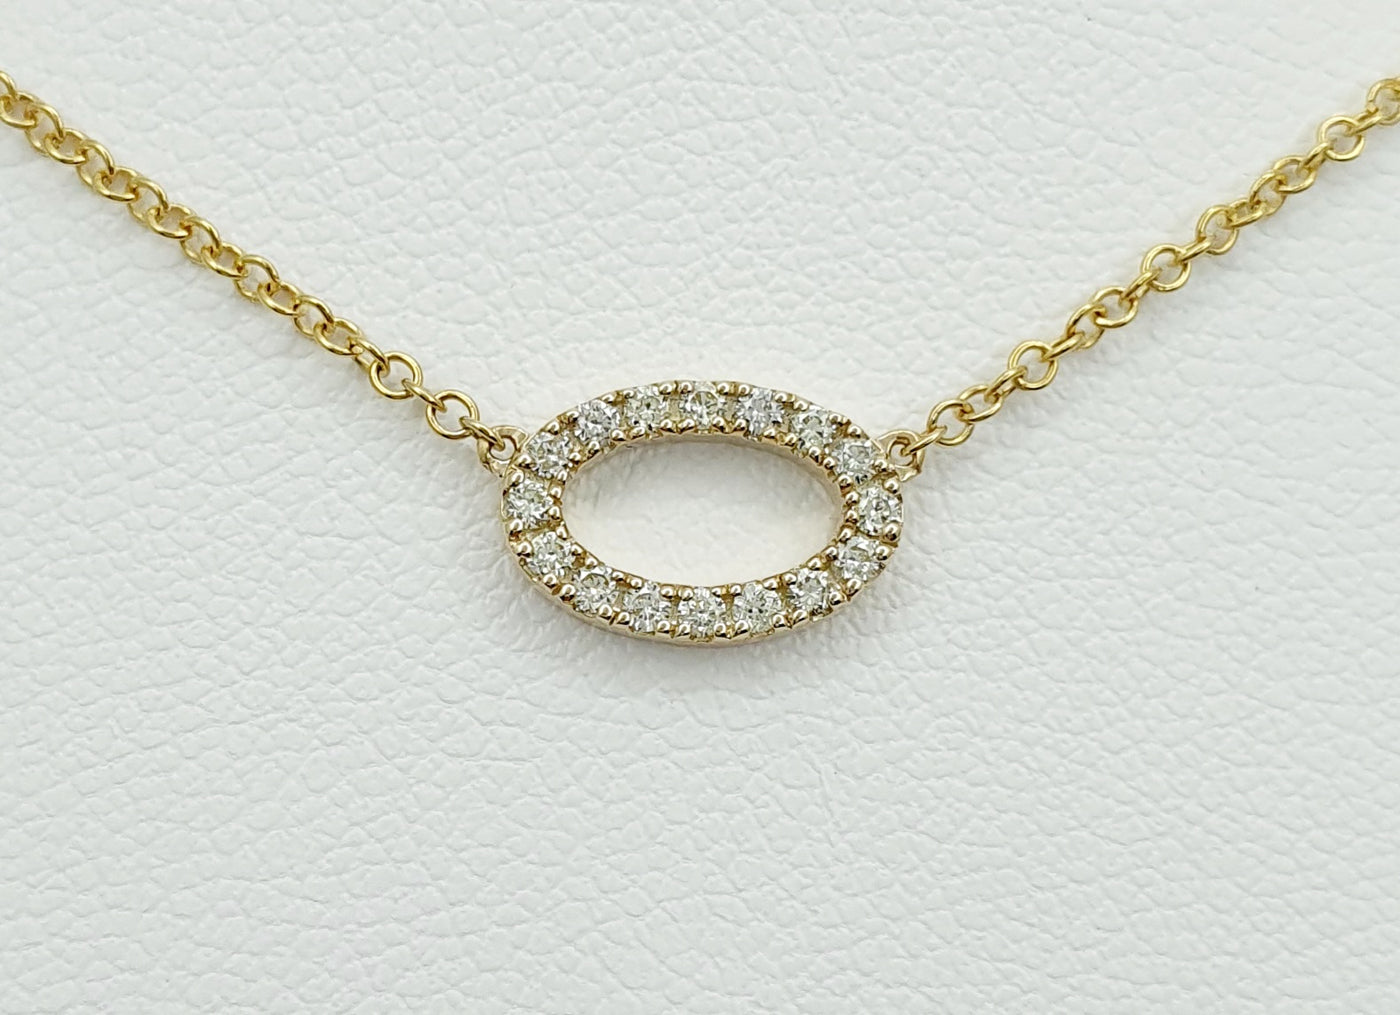 Mark McAskill Designed, 9ct Oval Diamond Pendant on Connected 9ct Gold Chain